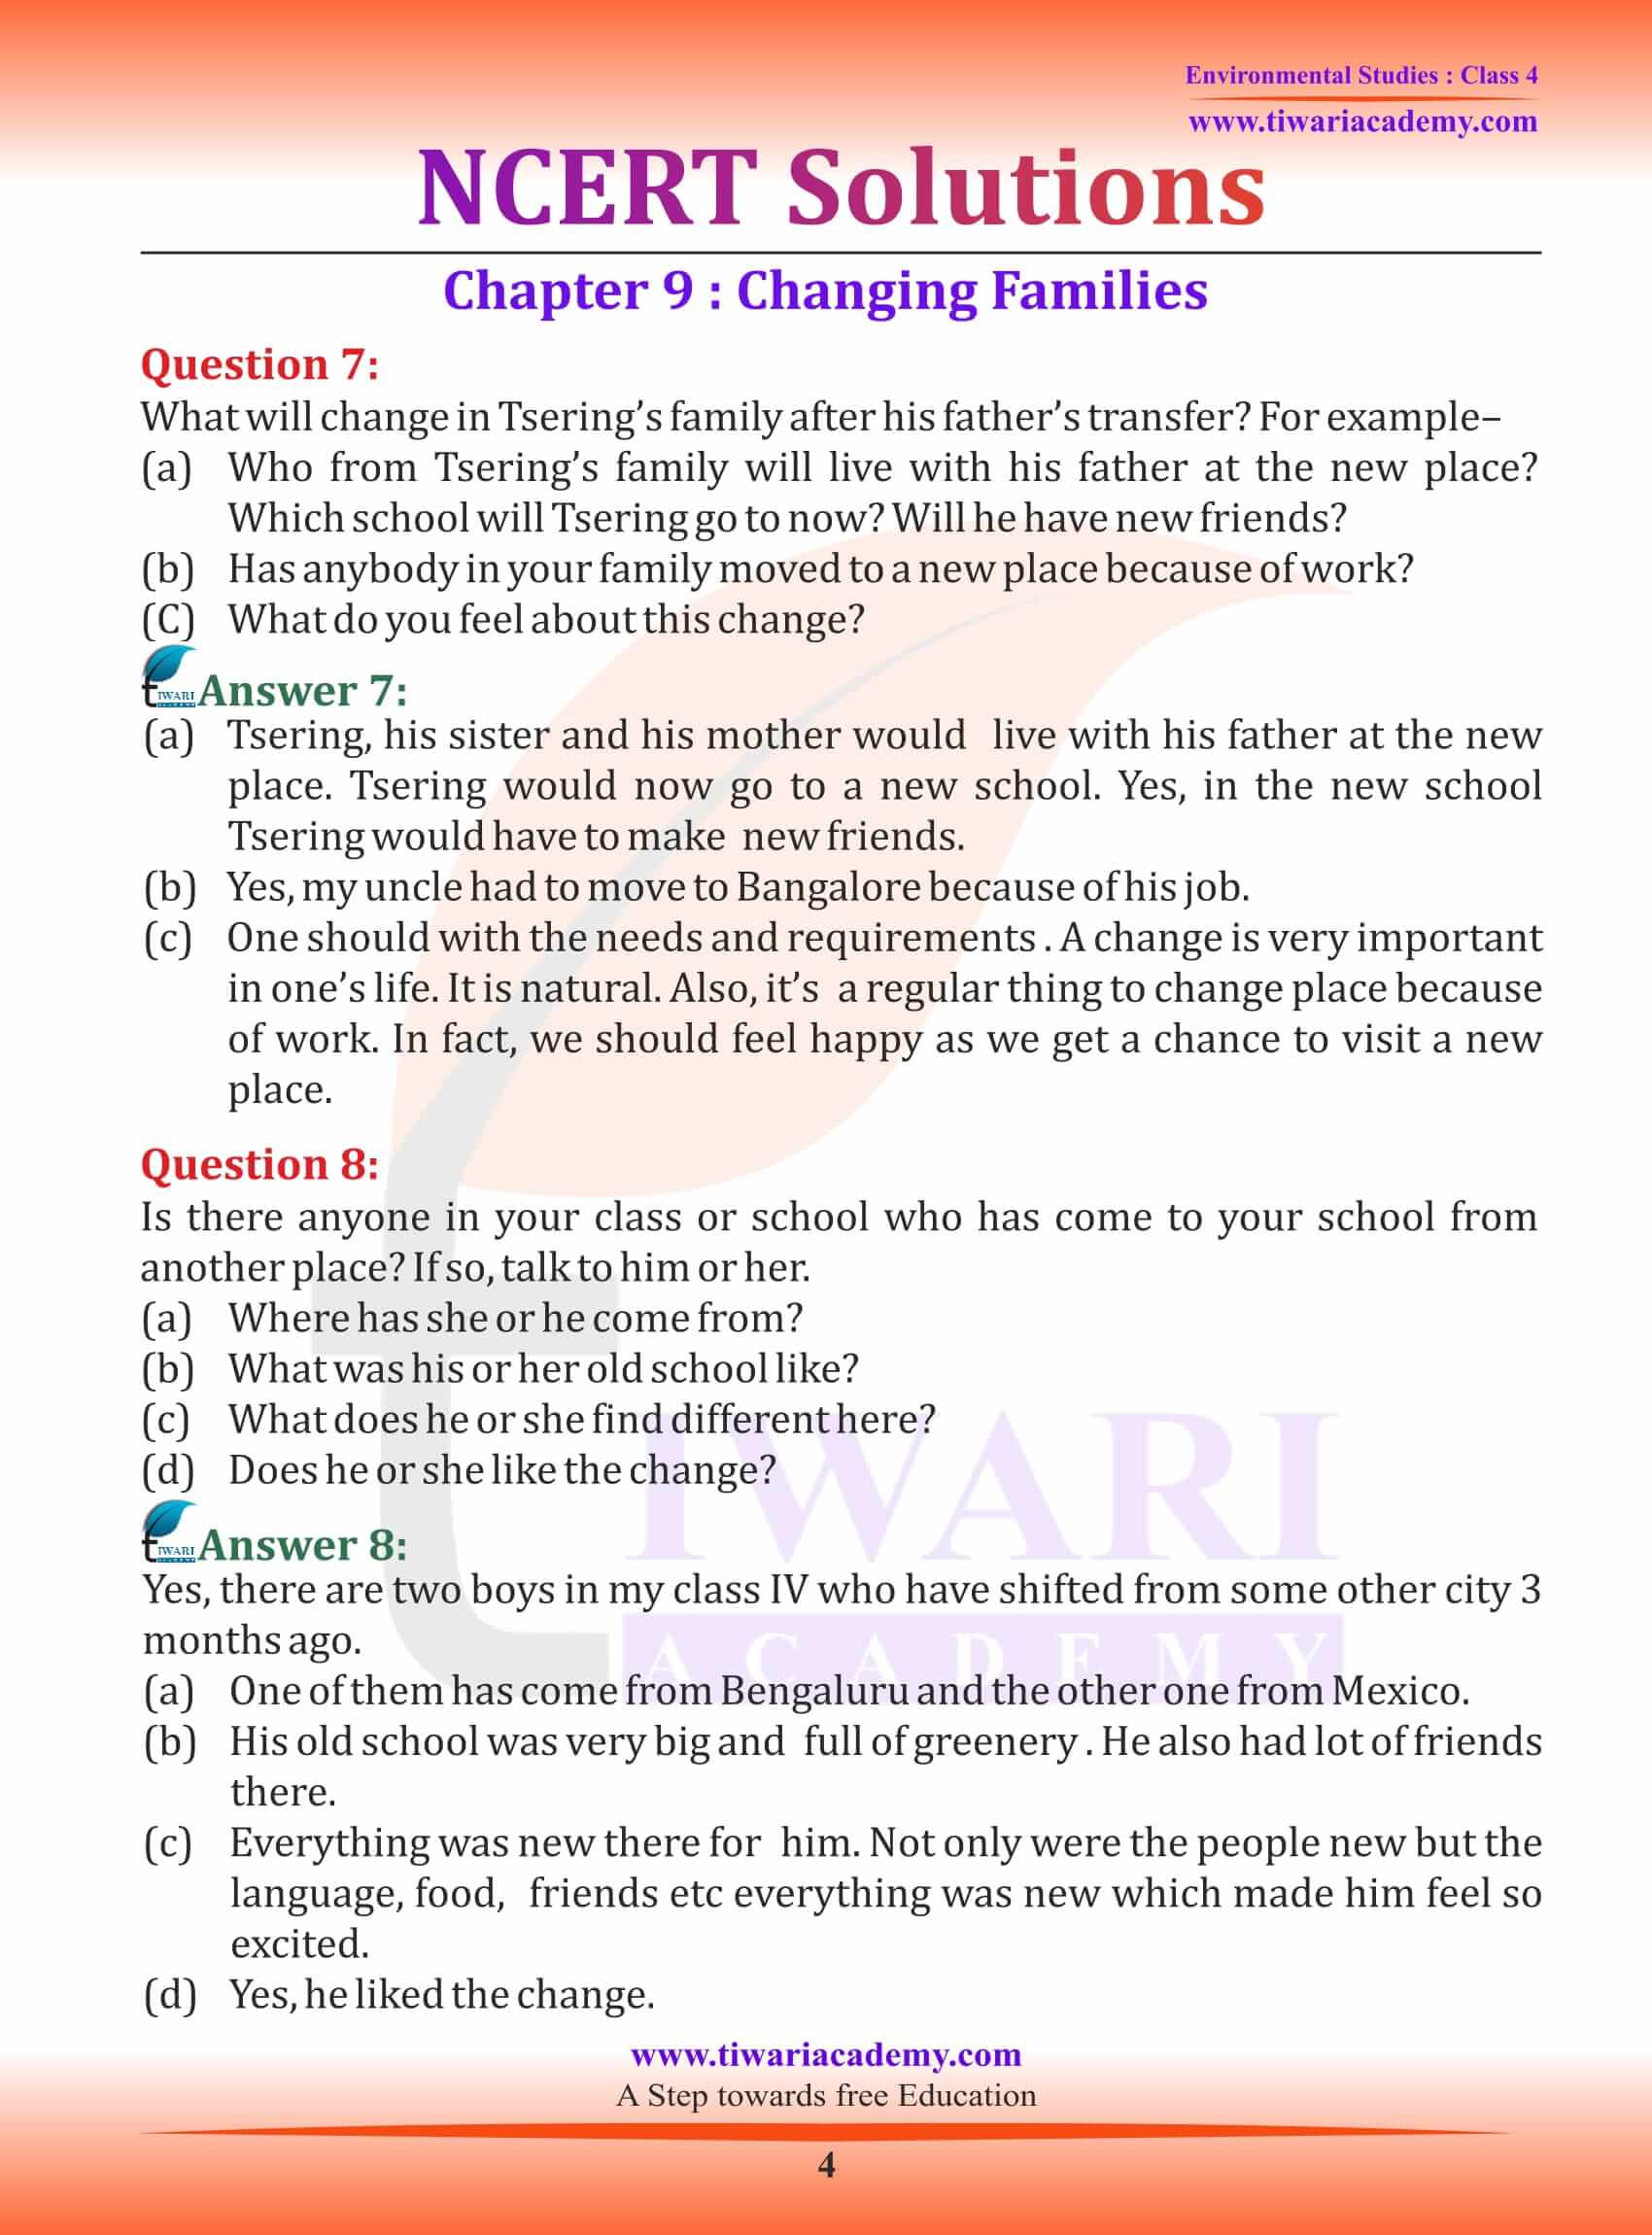 NCERT Solutions for Class 4 EVS Chapter 9 in English Medium